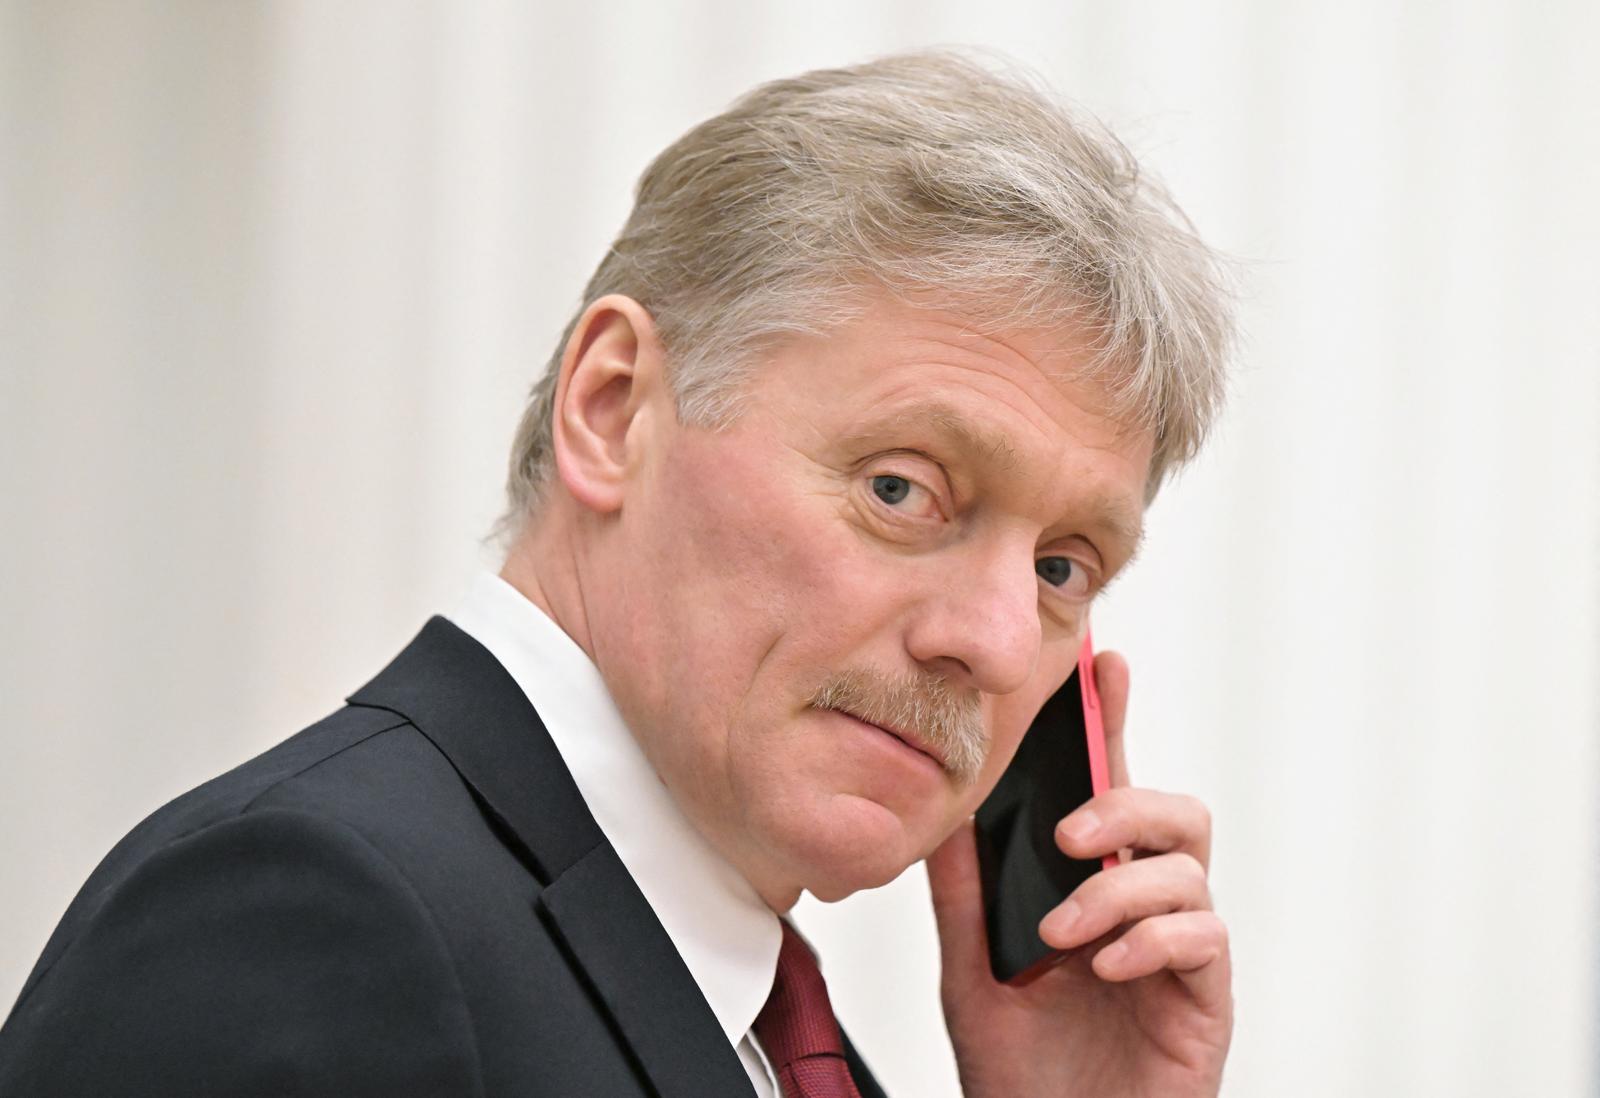 Kremlin spokesman Dmitry Peskov attends a joint news conference of Russian President Vladimir Putin and Belarusian President Alexander Lukashenko in Moscow, Russia February 18, 2022. Sputnik/Sergey Guneev/Kremlin via REUTERS ATTENTION EDITORS - THIS IMAGE WAS PROVIDED BY A THIRD PARTY. Photo: SPUTNIK/REUTERS